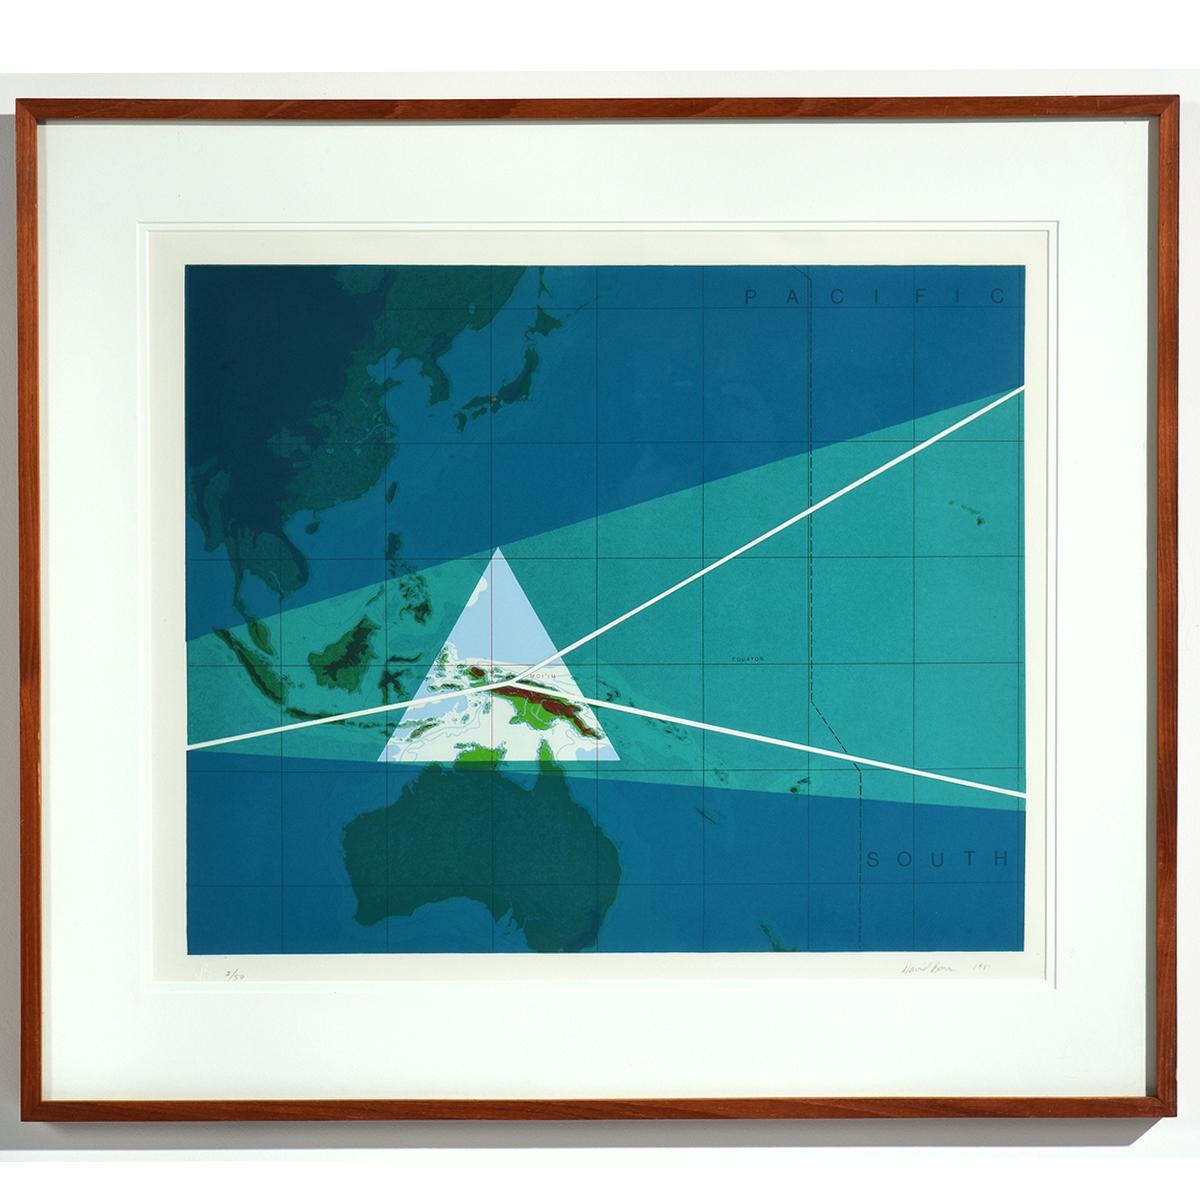 „Four Corners Project“ Mathematical Geographie und Global Art Monograph in Blau